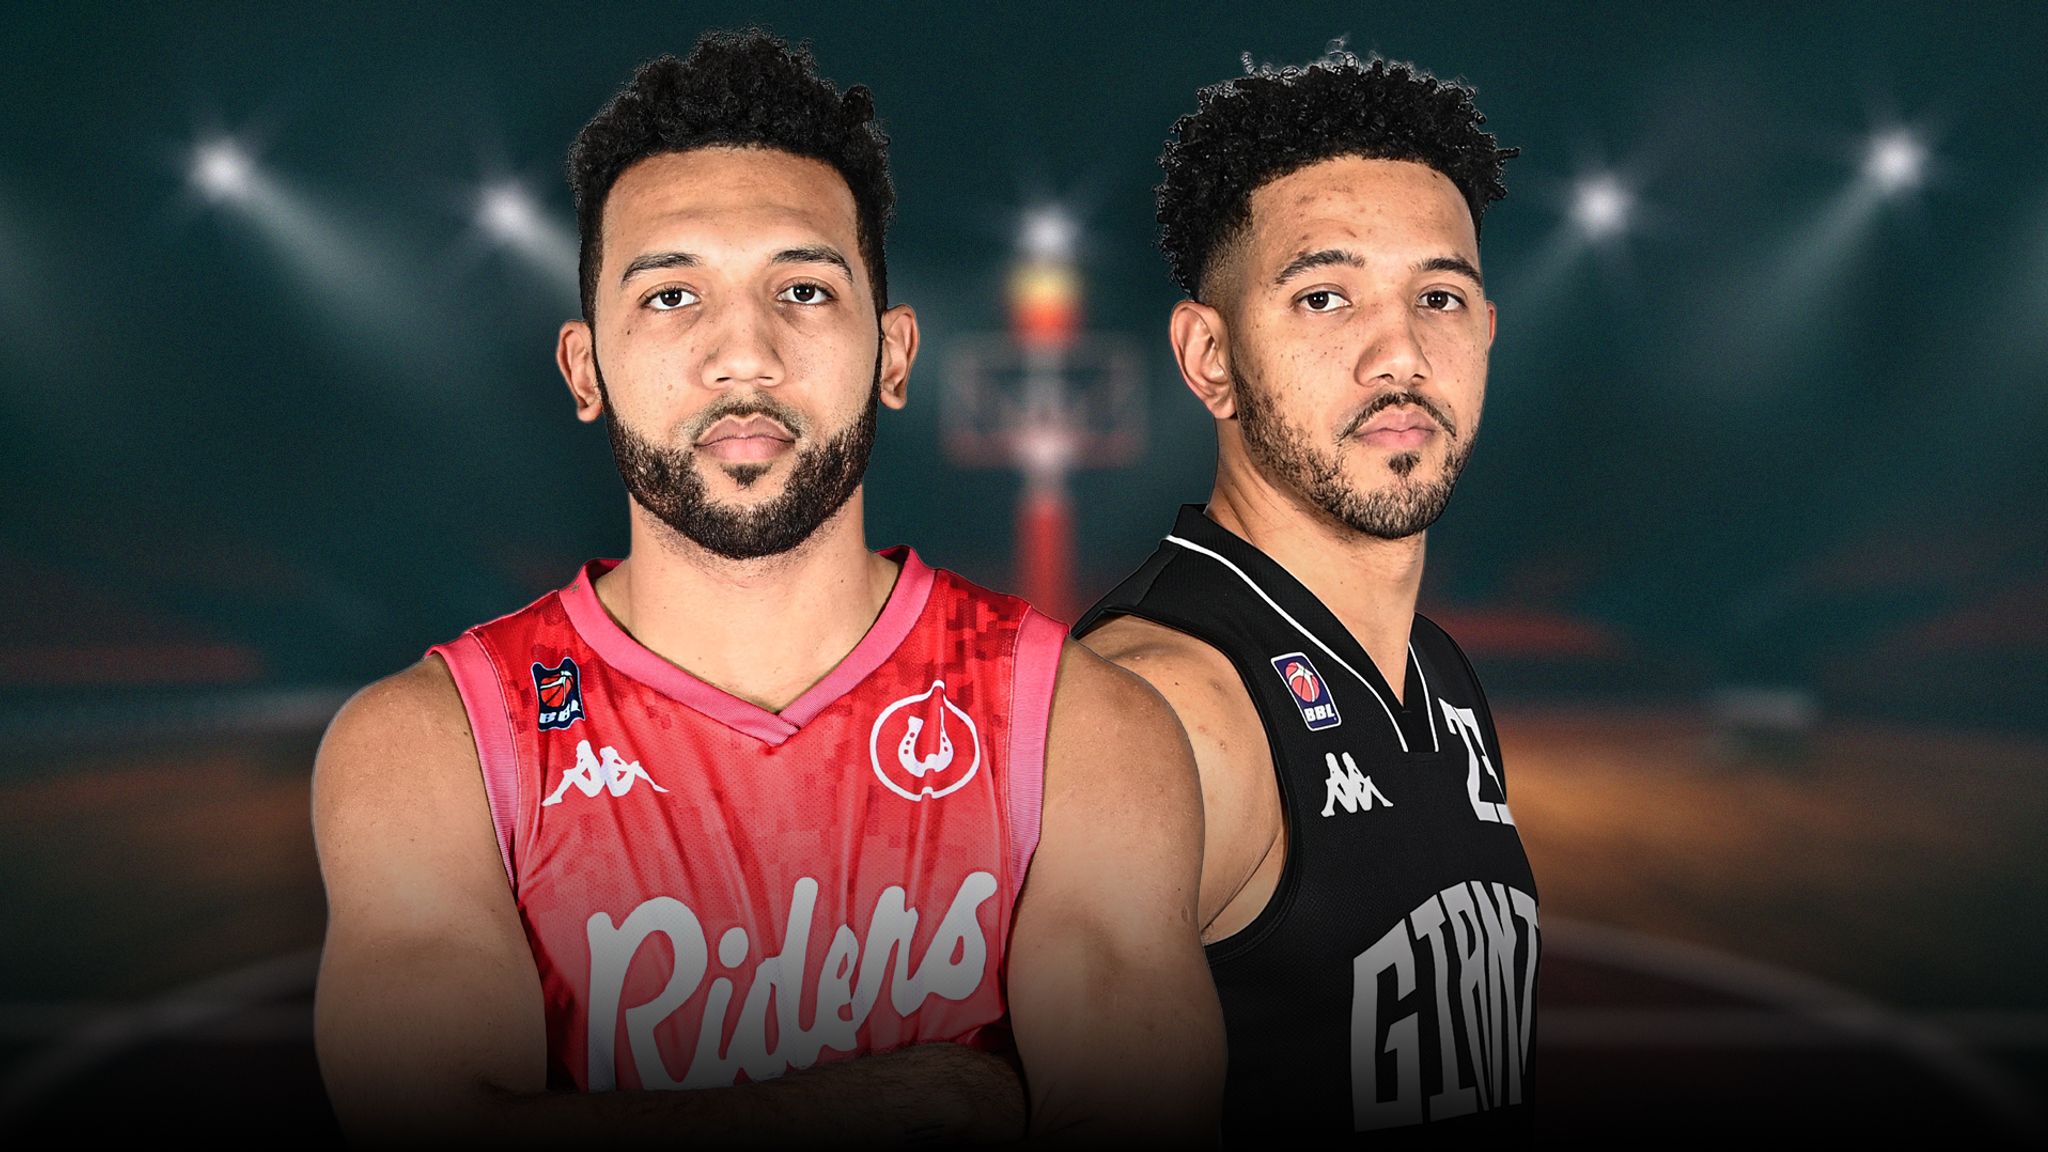 BBL Cup final Brothers Patrick and Jordan Whelan battling each other as Leicester Riders face Manchester Giants Basketball News Sky Sports